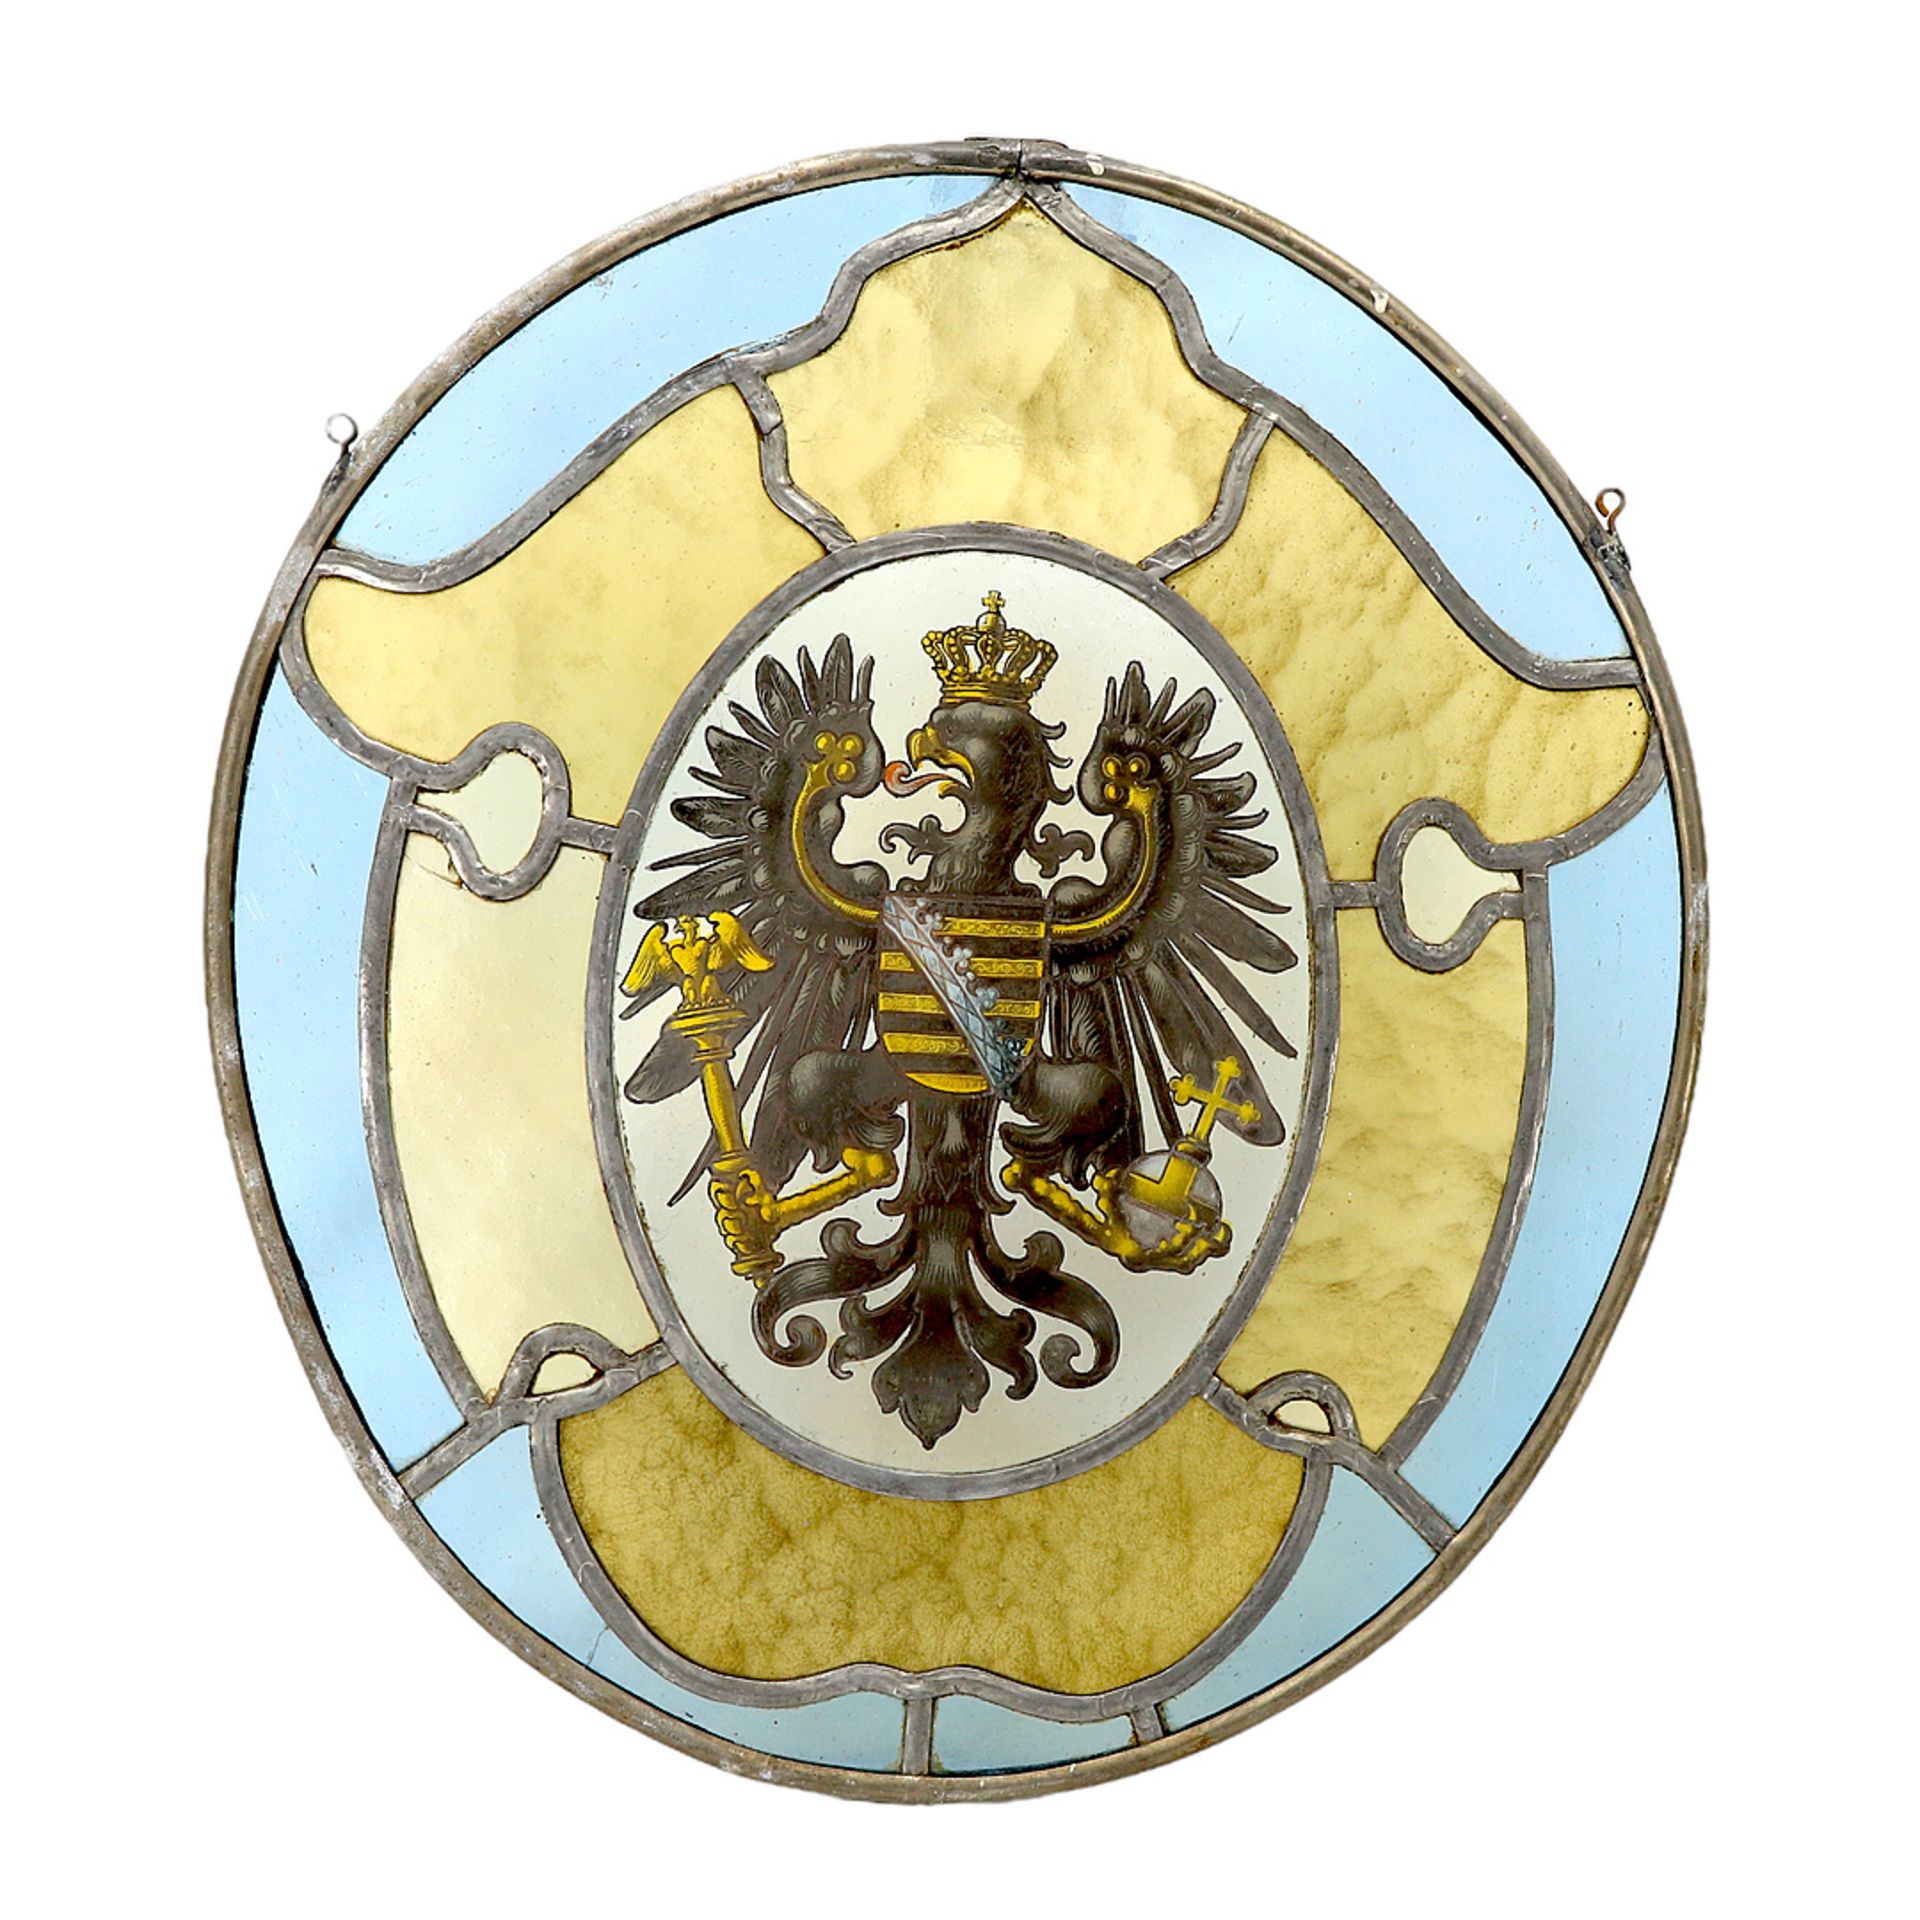 German glass workshop, Glass painting with the Saxony coat of arms, around 1880